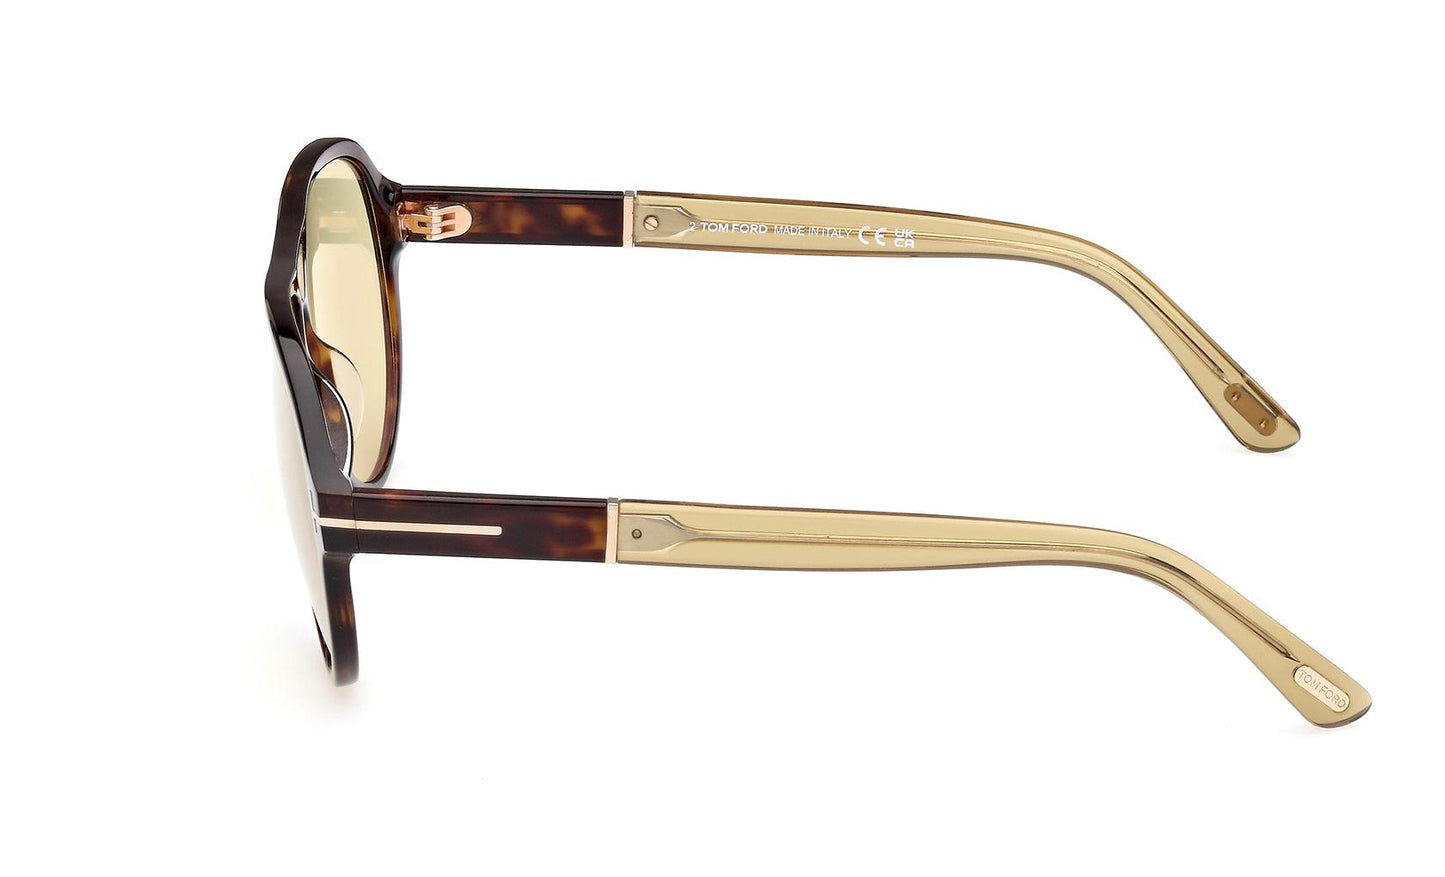 Tom Ford Sunglasses QUINCY 52N